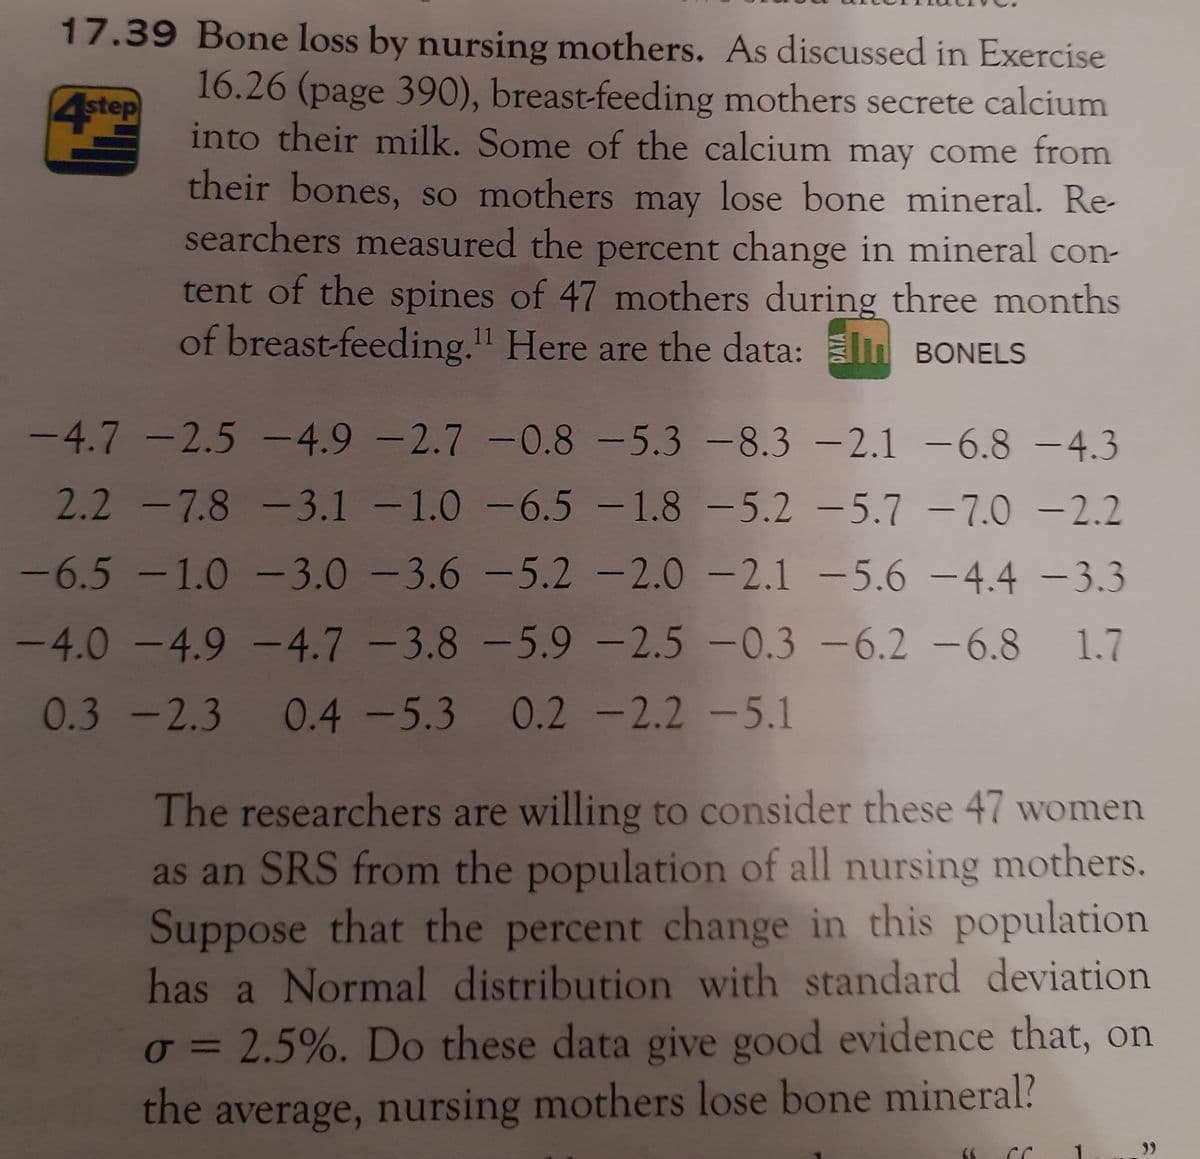 17.39 Bone loss by nursing mothers. As discussed in Exercise
16.26 (page 390), breast-feeding mothers secrete calcium
into their milk. Some of the calcium may come from
4step
their bones, so mothers may lose bone mineral. Re-
searchers measured the percent change in mineral con-
tent of the spines of 47 mothers during three months
of breast-feeding." Here are the data: M BONELS
11
-4.7 -2.5-4.9 -2.7 -0.8 -5.3 -8.3 -2.1 -6.8 -4.3
2.2--7.8-3.1 -1.0 -6.5 -1.8 -5.2 -5.7 -7.0 -2.2
|
-6.5-1.0-3.0-3.6 -5.2 -2.0 -2.1 -5.6 -4.4 -3.3
|
-4.0-4.9 -4.7 -3.8 -5.9 -2.5 -0.3-6.2 -6.8
1.7
0.3-2.3 0.4 -5.3 0.2 -2.2 -5.1
The researchers are willing to consider these 47 women
as an SRS from the population of all nursing mothers.
Suppose that the percent change in this population
has a Normal distribution with standard deviation
o = 2.5%. Do these data give good evidence that, on
%3D
the
average, nursing mothers lose bone mineral?
>>
